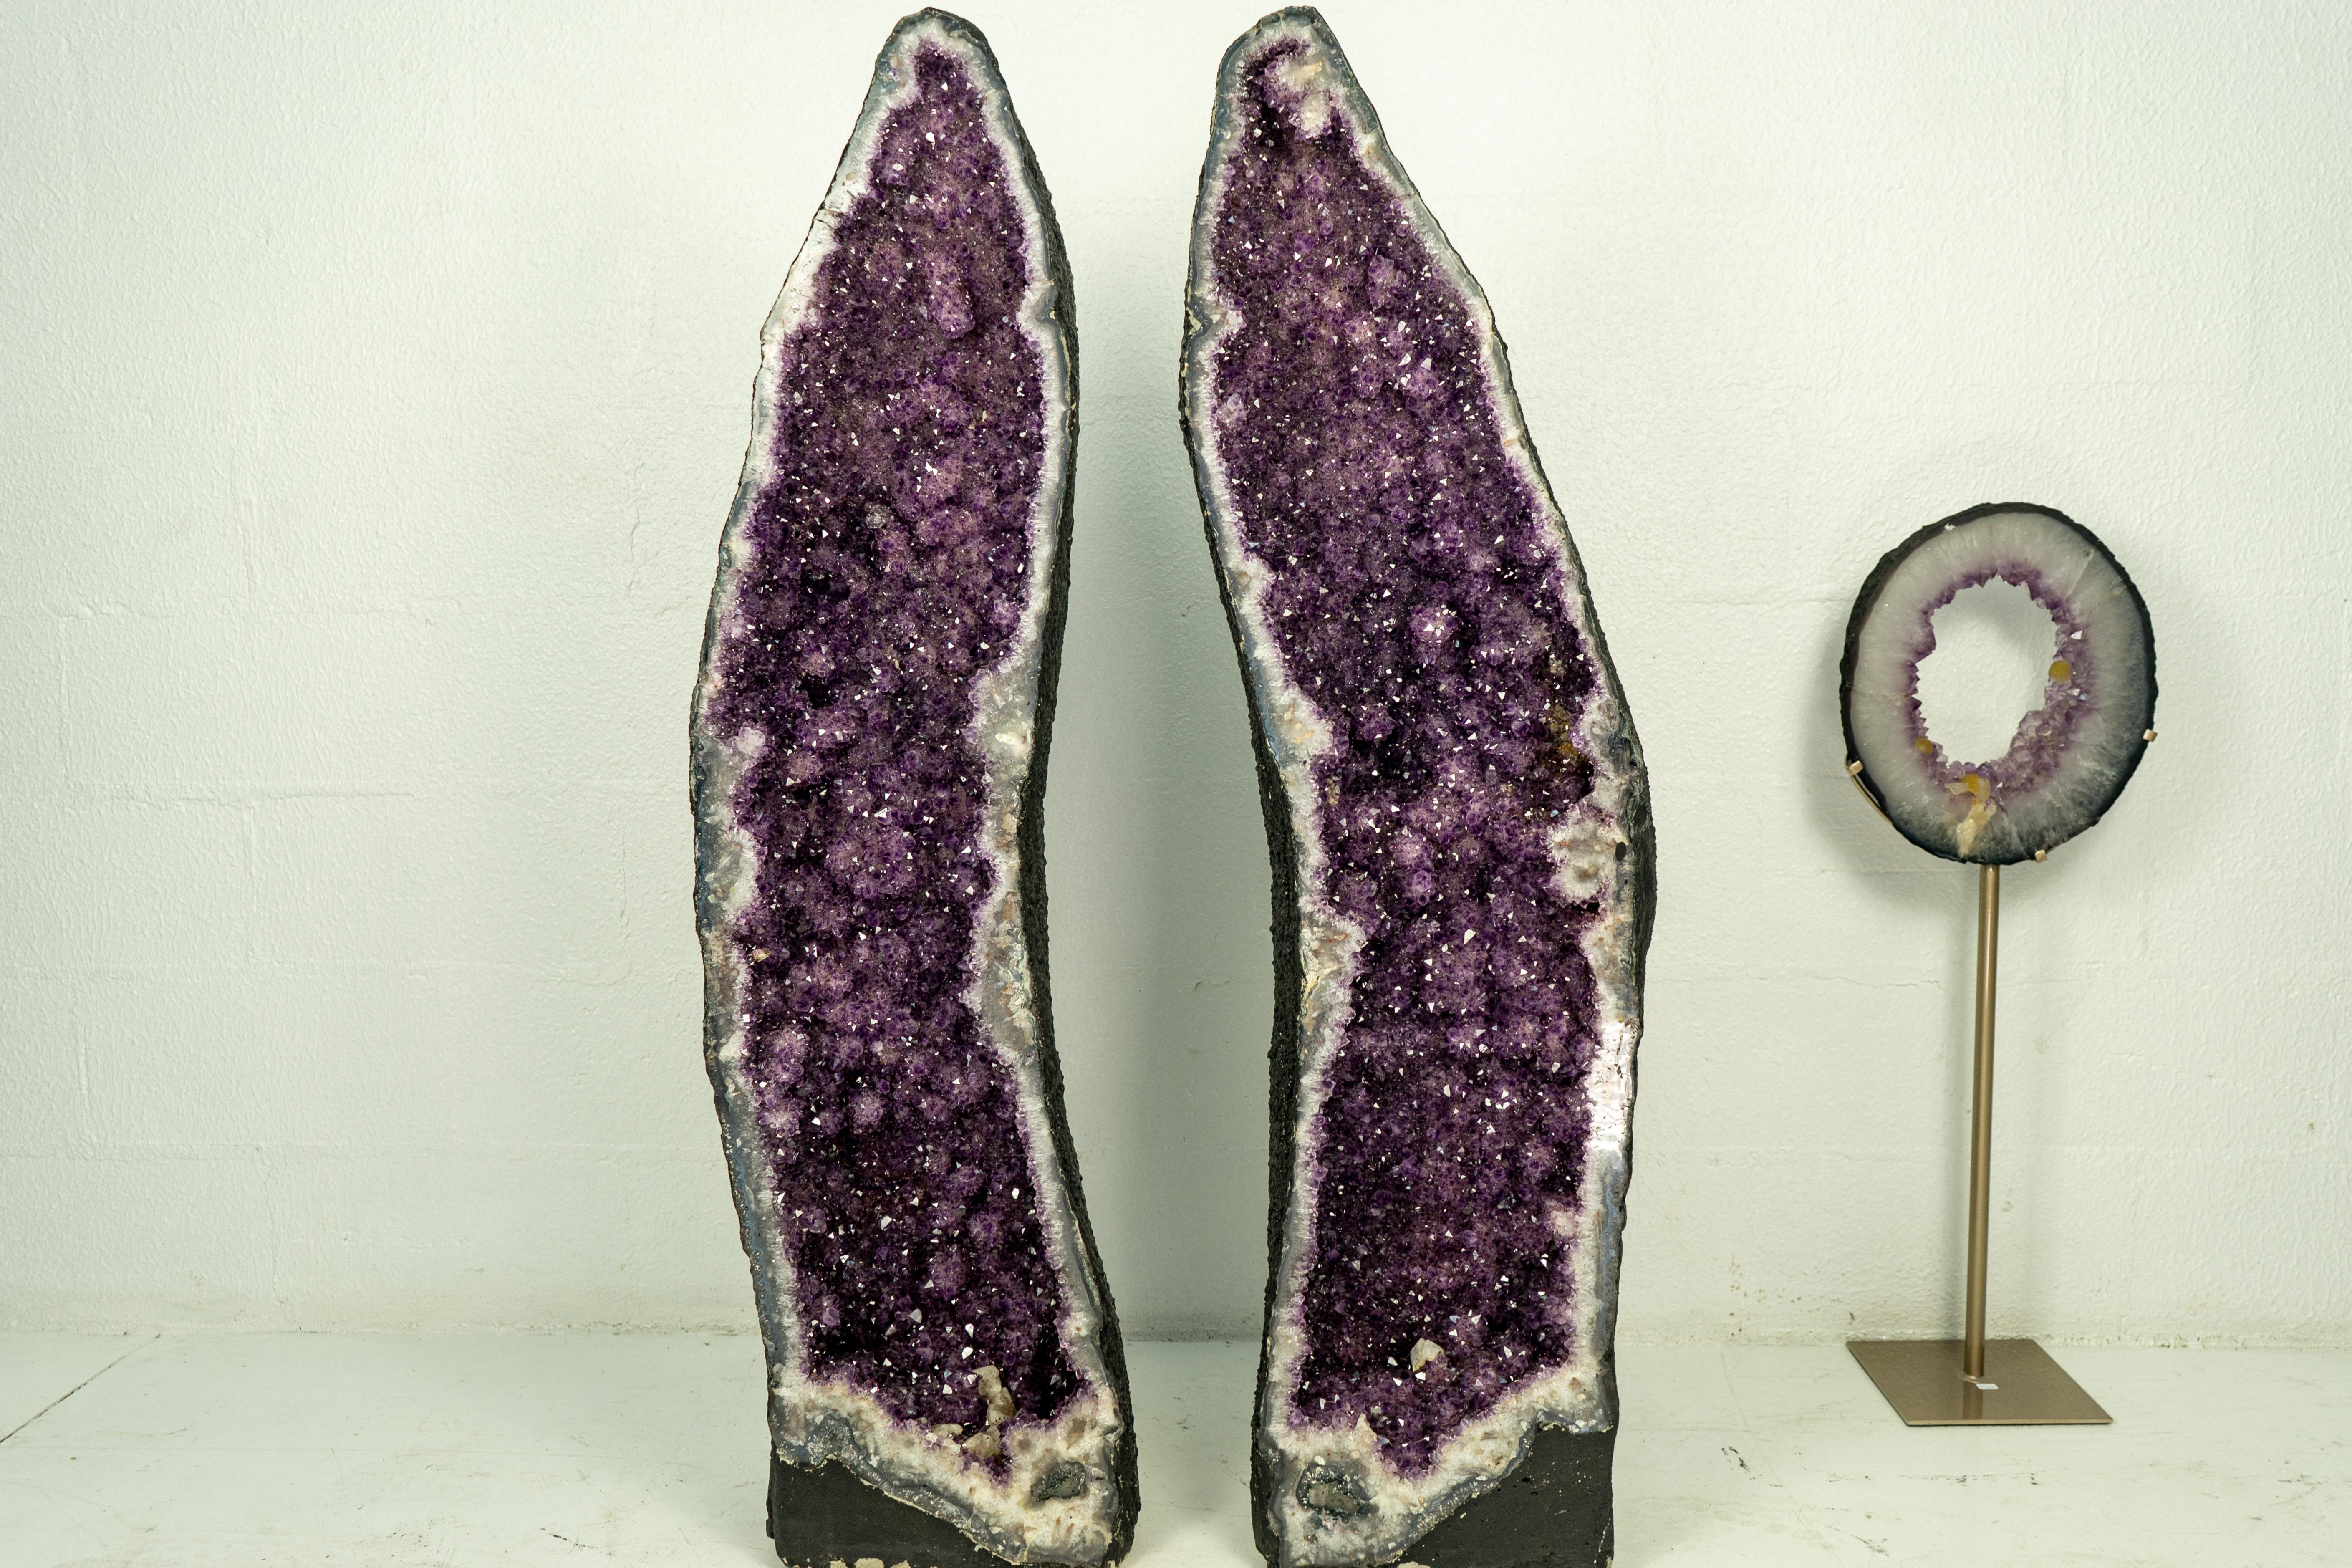 A book-matching pair of Amethyst Geodes bringing gorgeous characteristics as its beautiful aesthetics, shiny druzy, gorgeous color, X-Tall size, and formed as a cathedral-shaped geode. This is a natural artwork, ready to become a magnificent décor